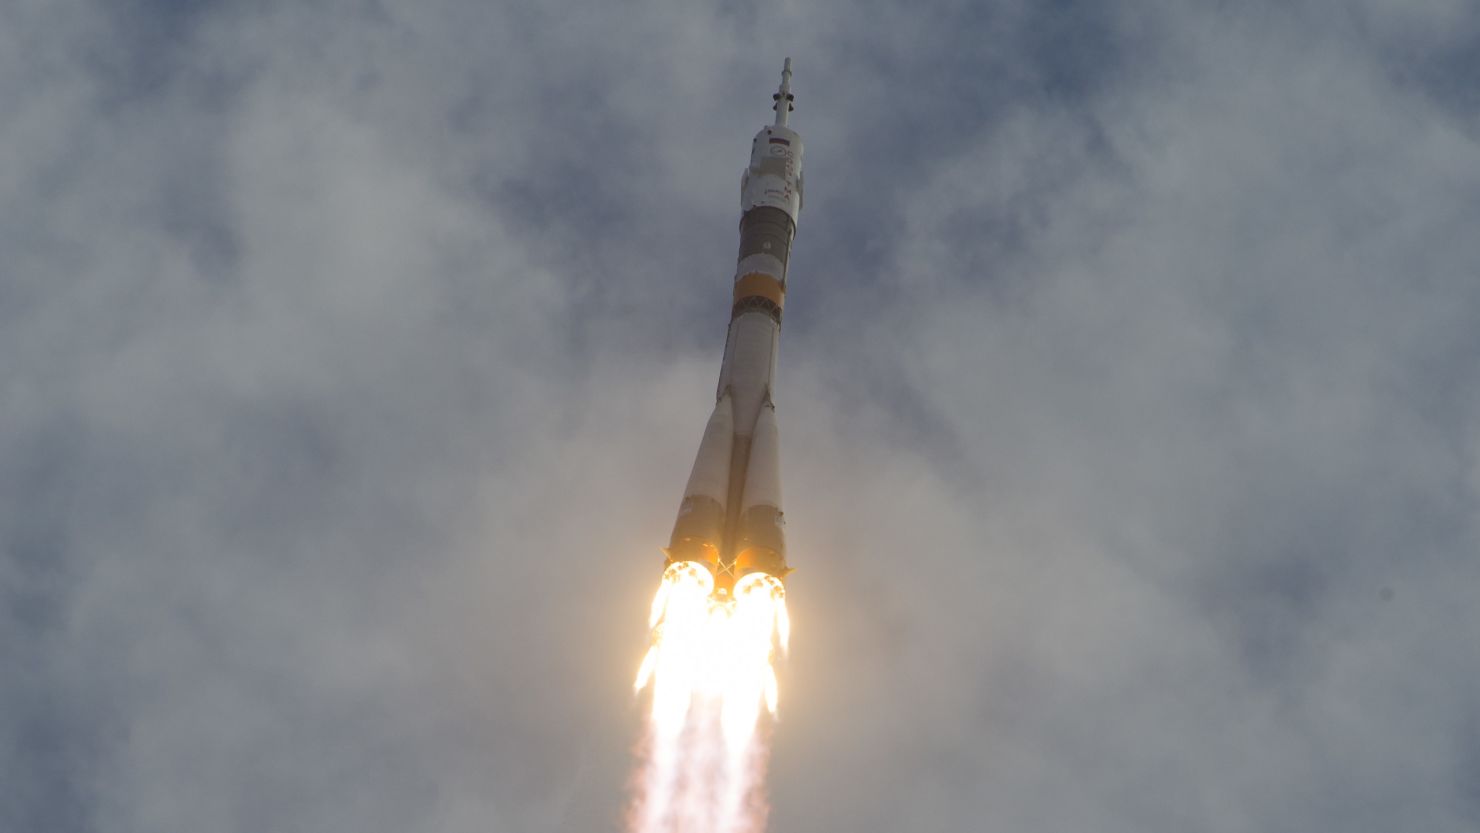 The Soyuz TMA-05M rocket launches from the Baikonur Cosmodrome on Sunday in Kazakhstan.